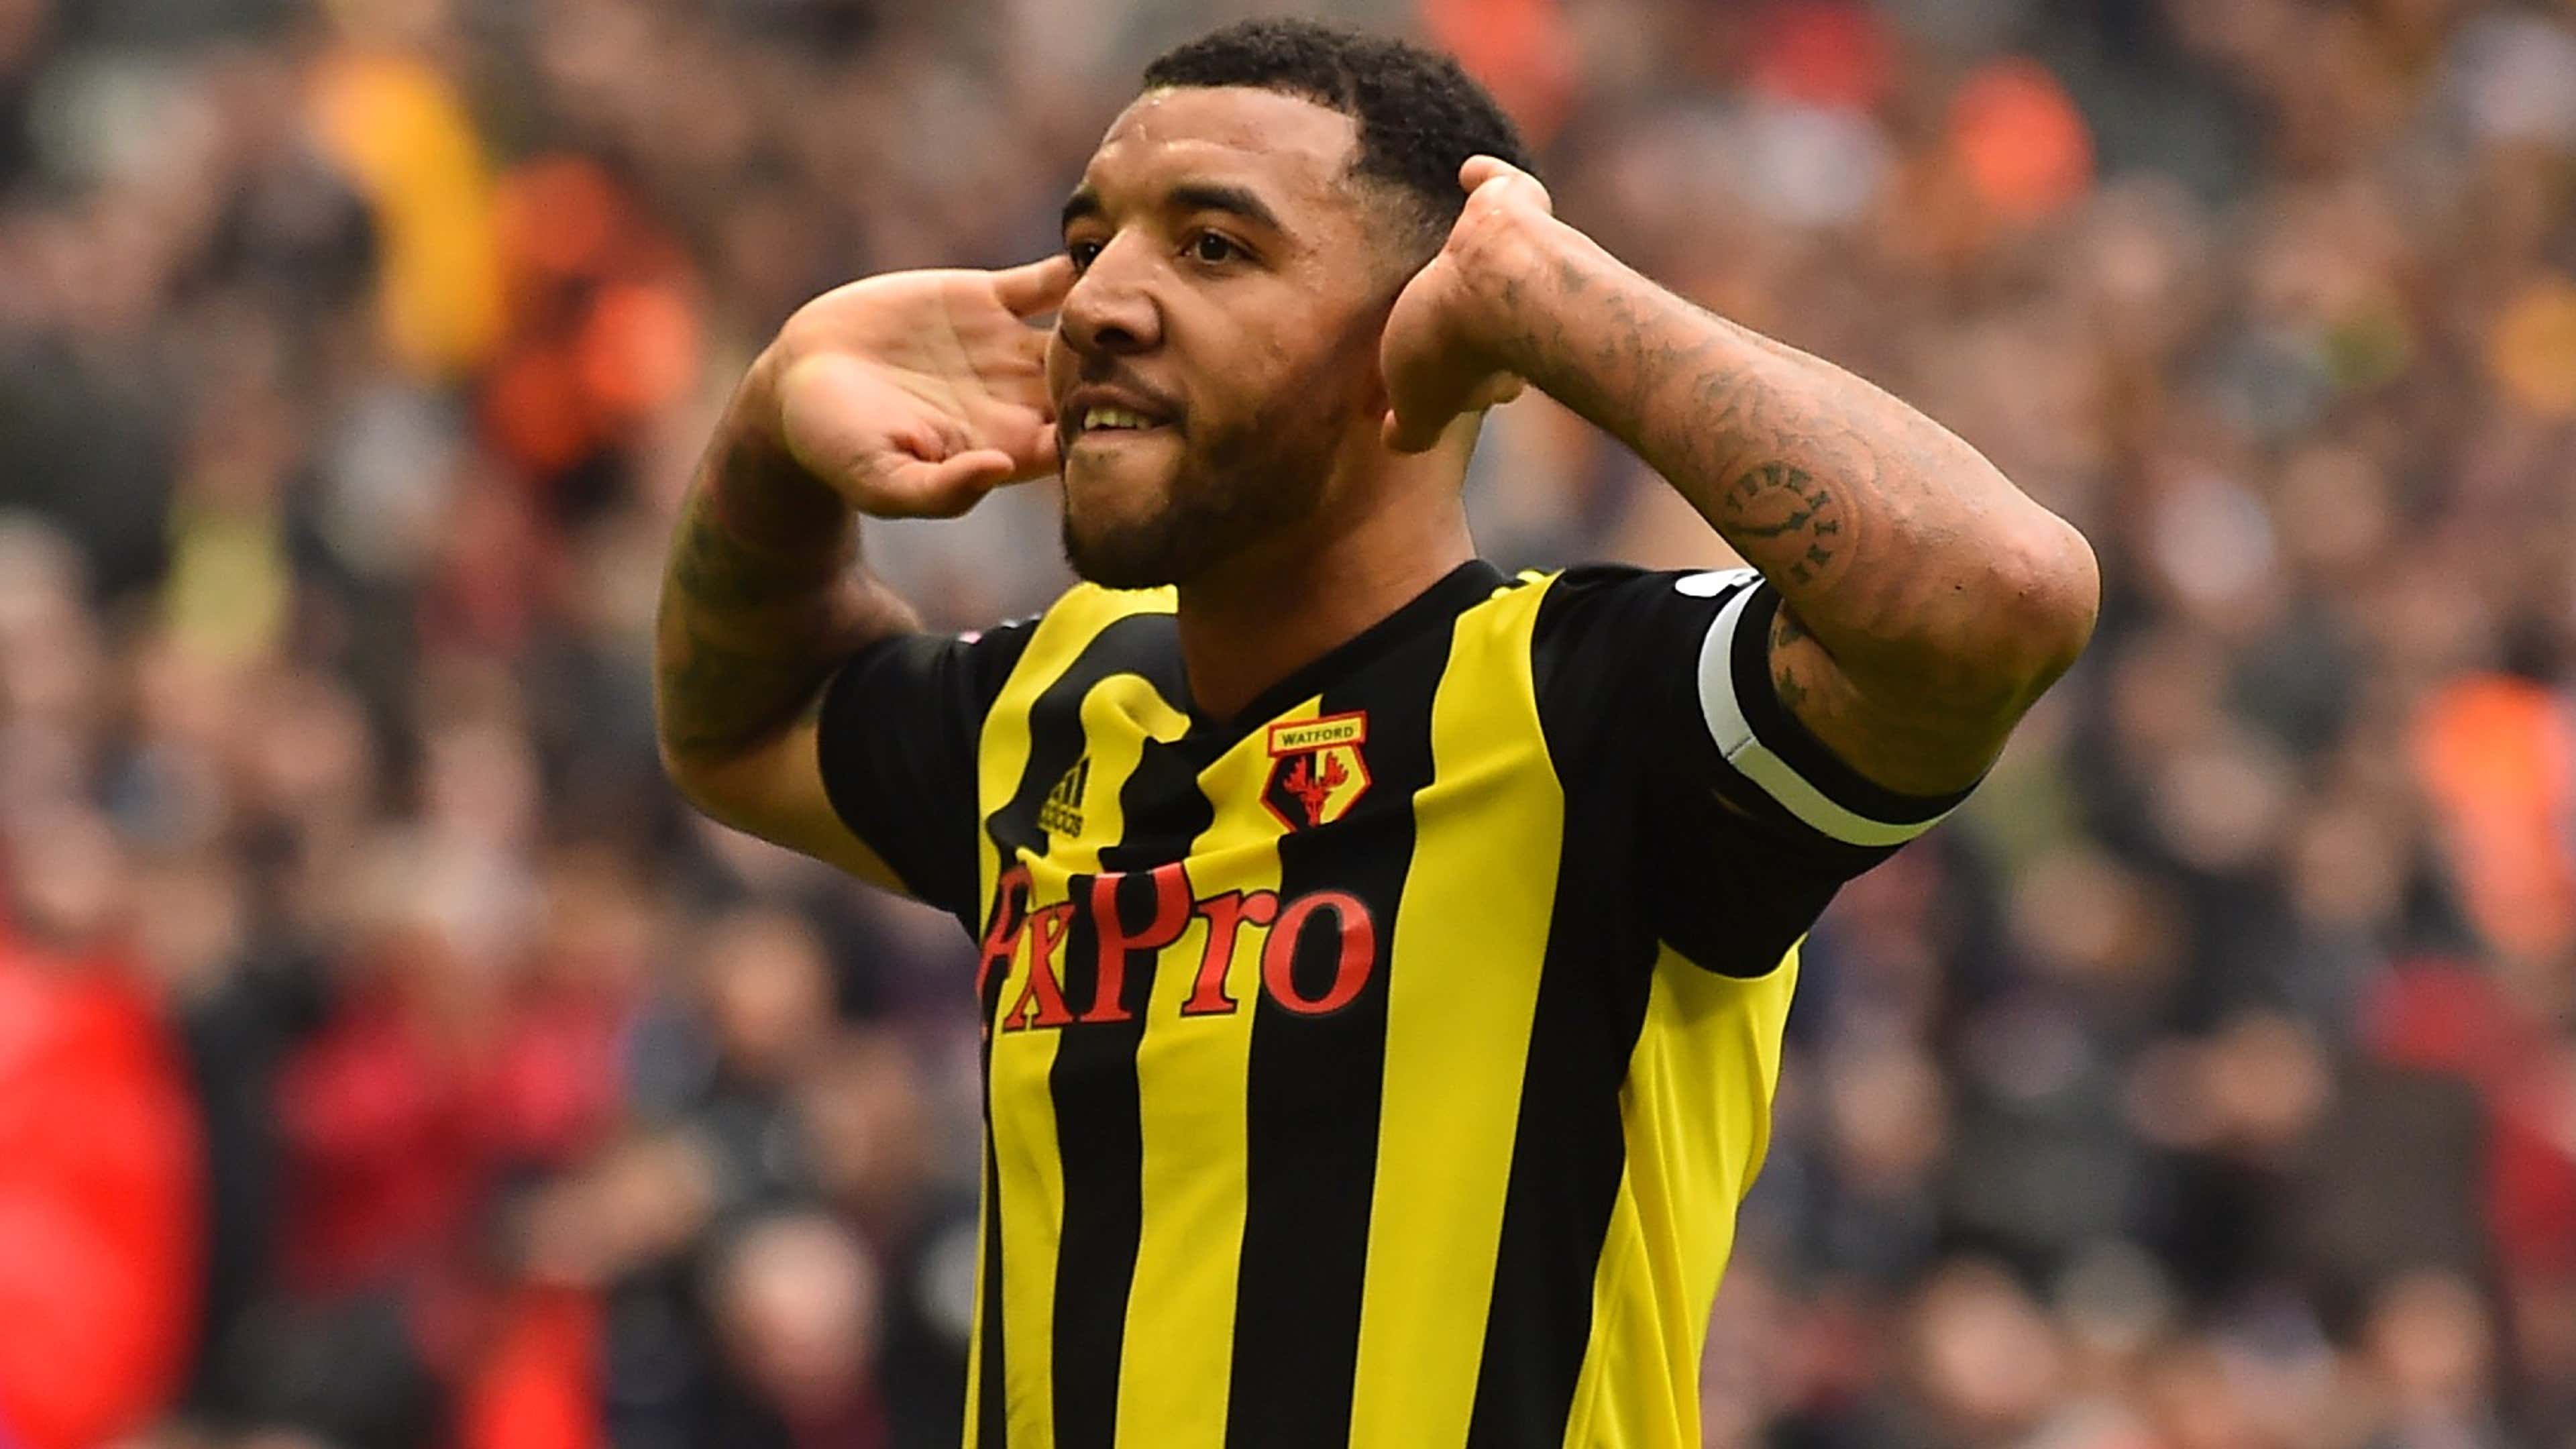 Arsenal tried to sign Troy Deeney but ex-Watford striker claims he turned  down shock transfer because he wouldn't say sorry for 'cojones' comment  that infuriated fans | Goal.com Cameroon